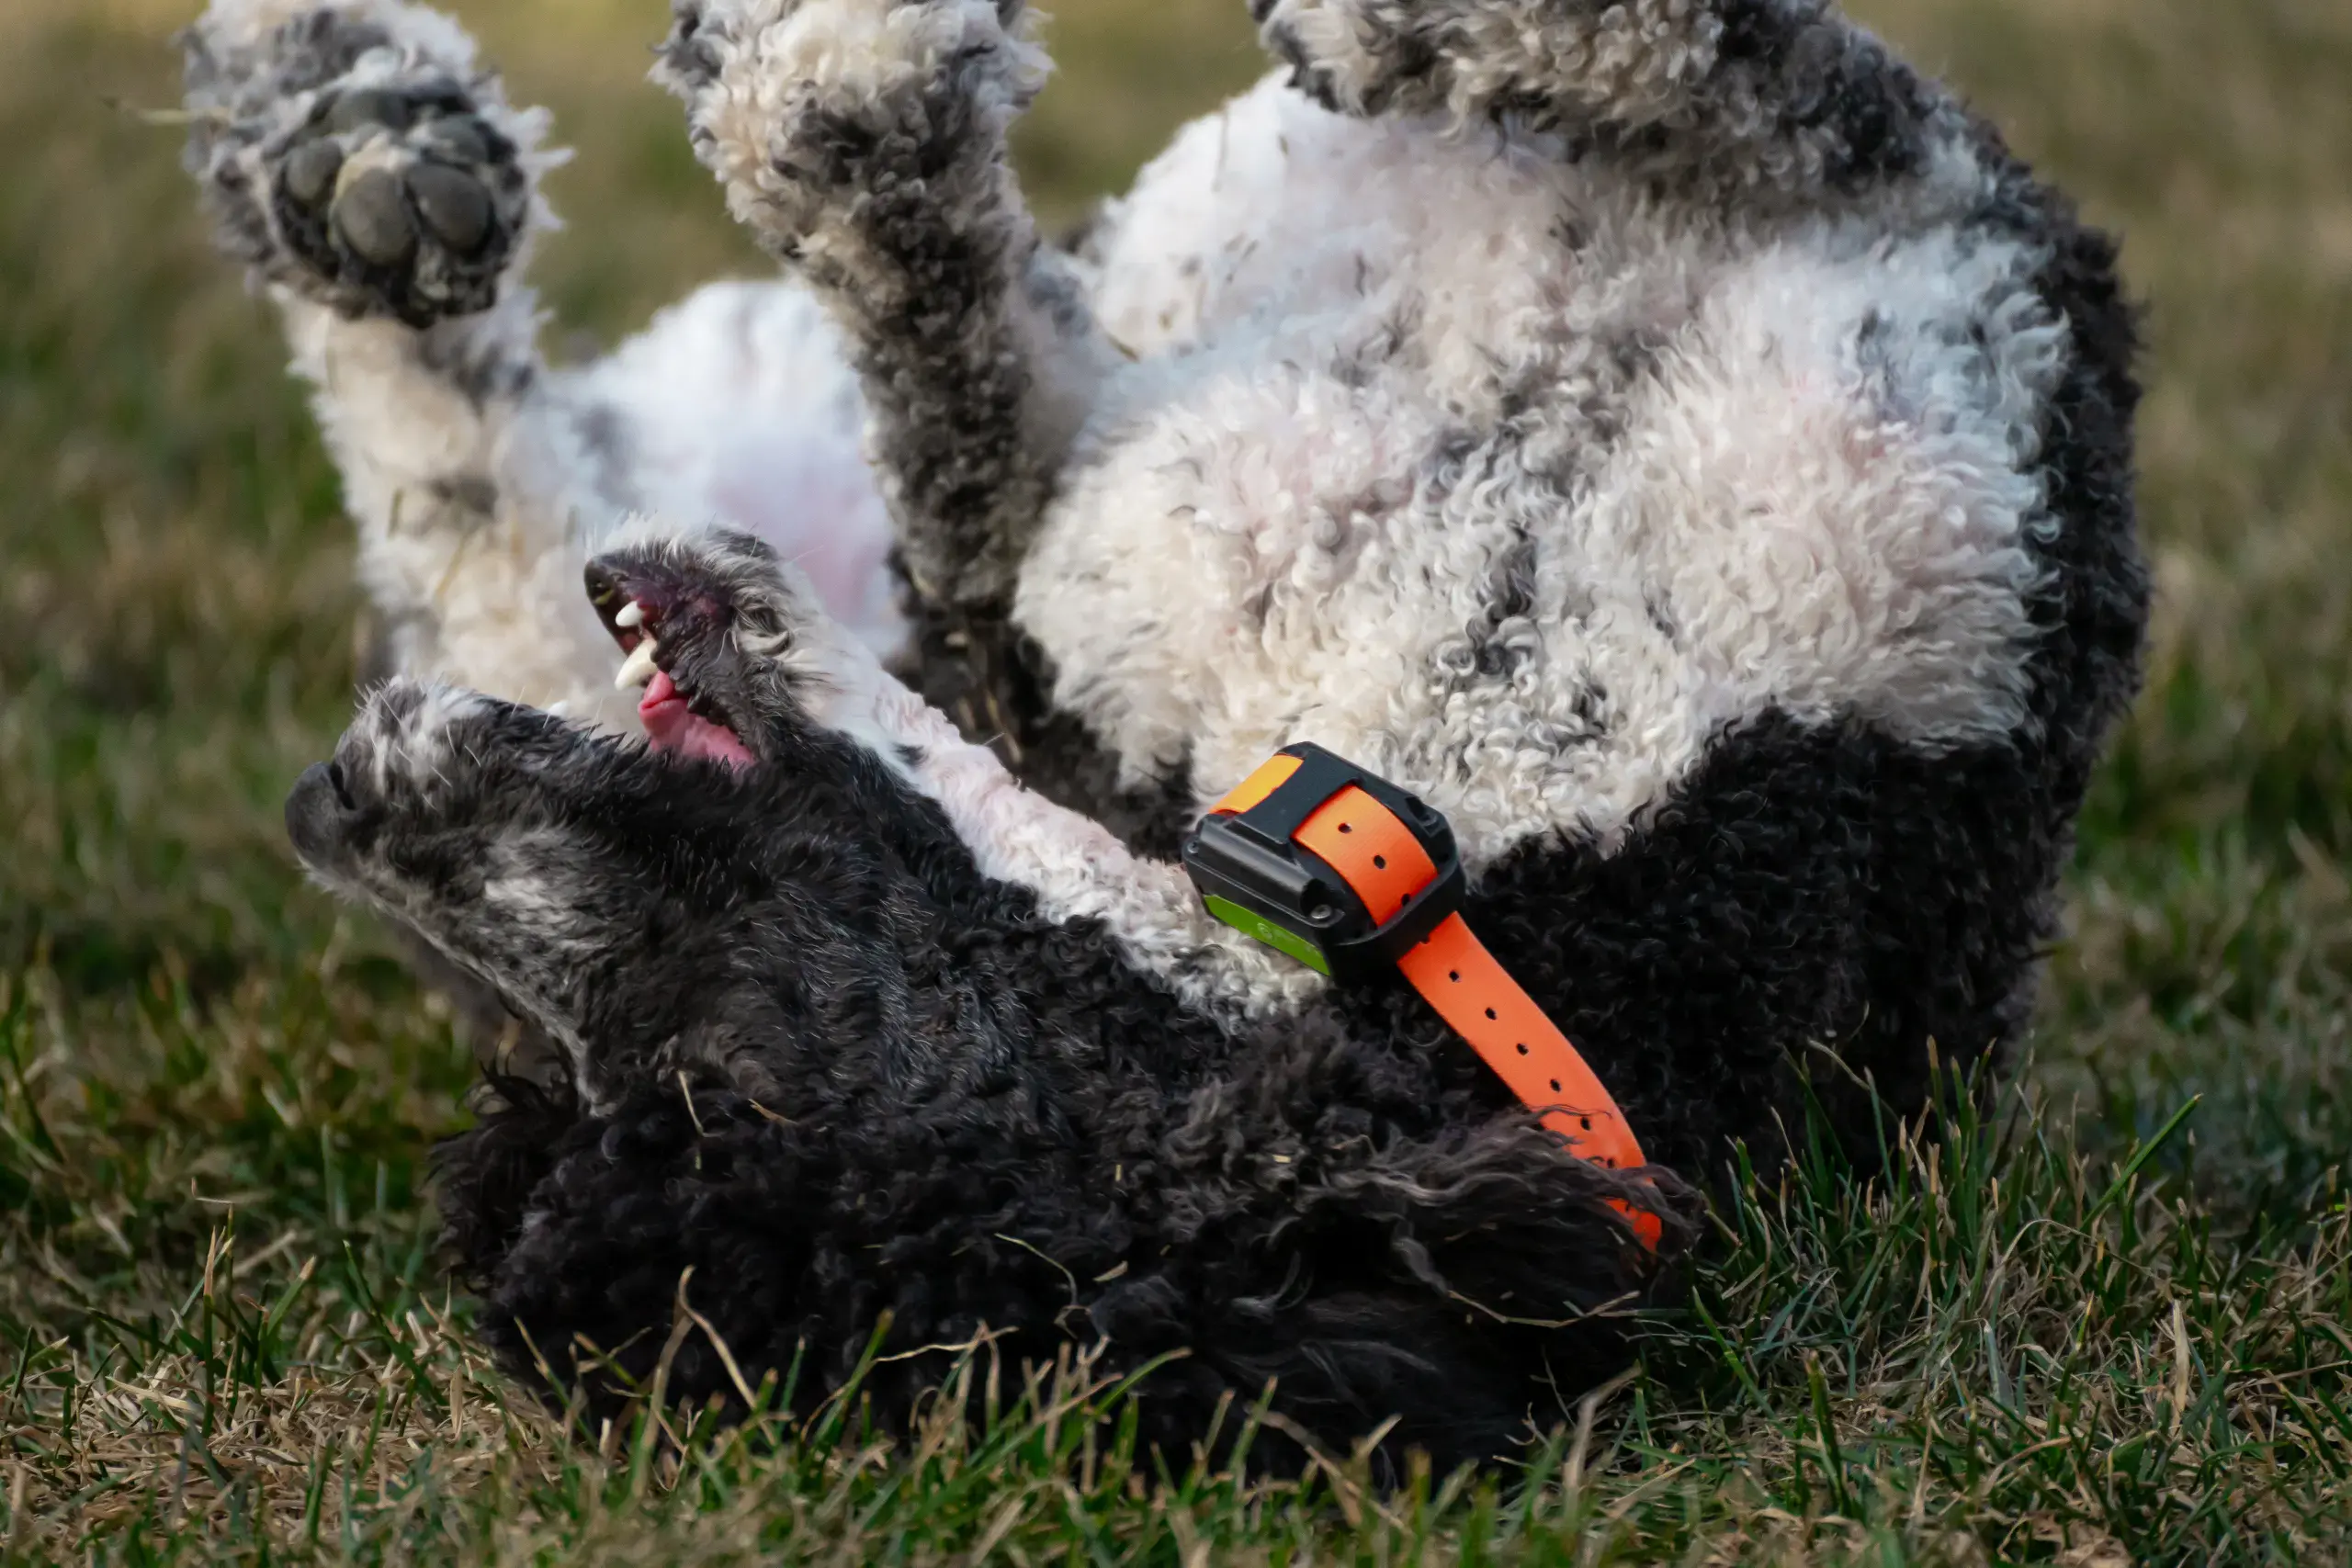 Black and White Party Poodle rolling in the grass, currently upsidedown on his back